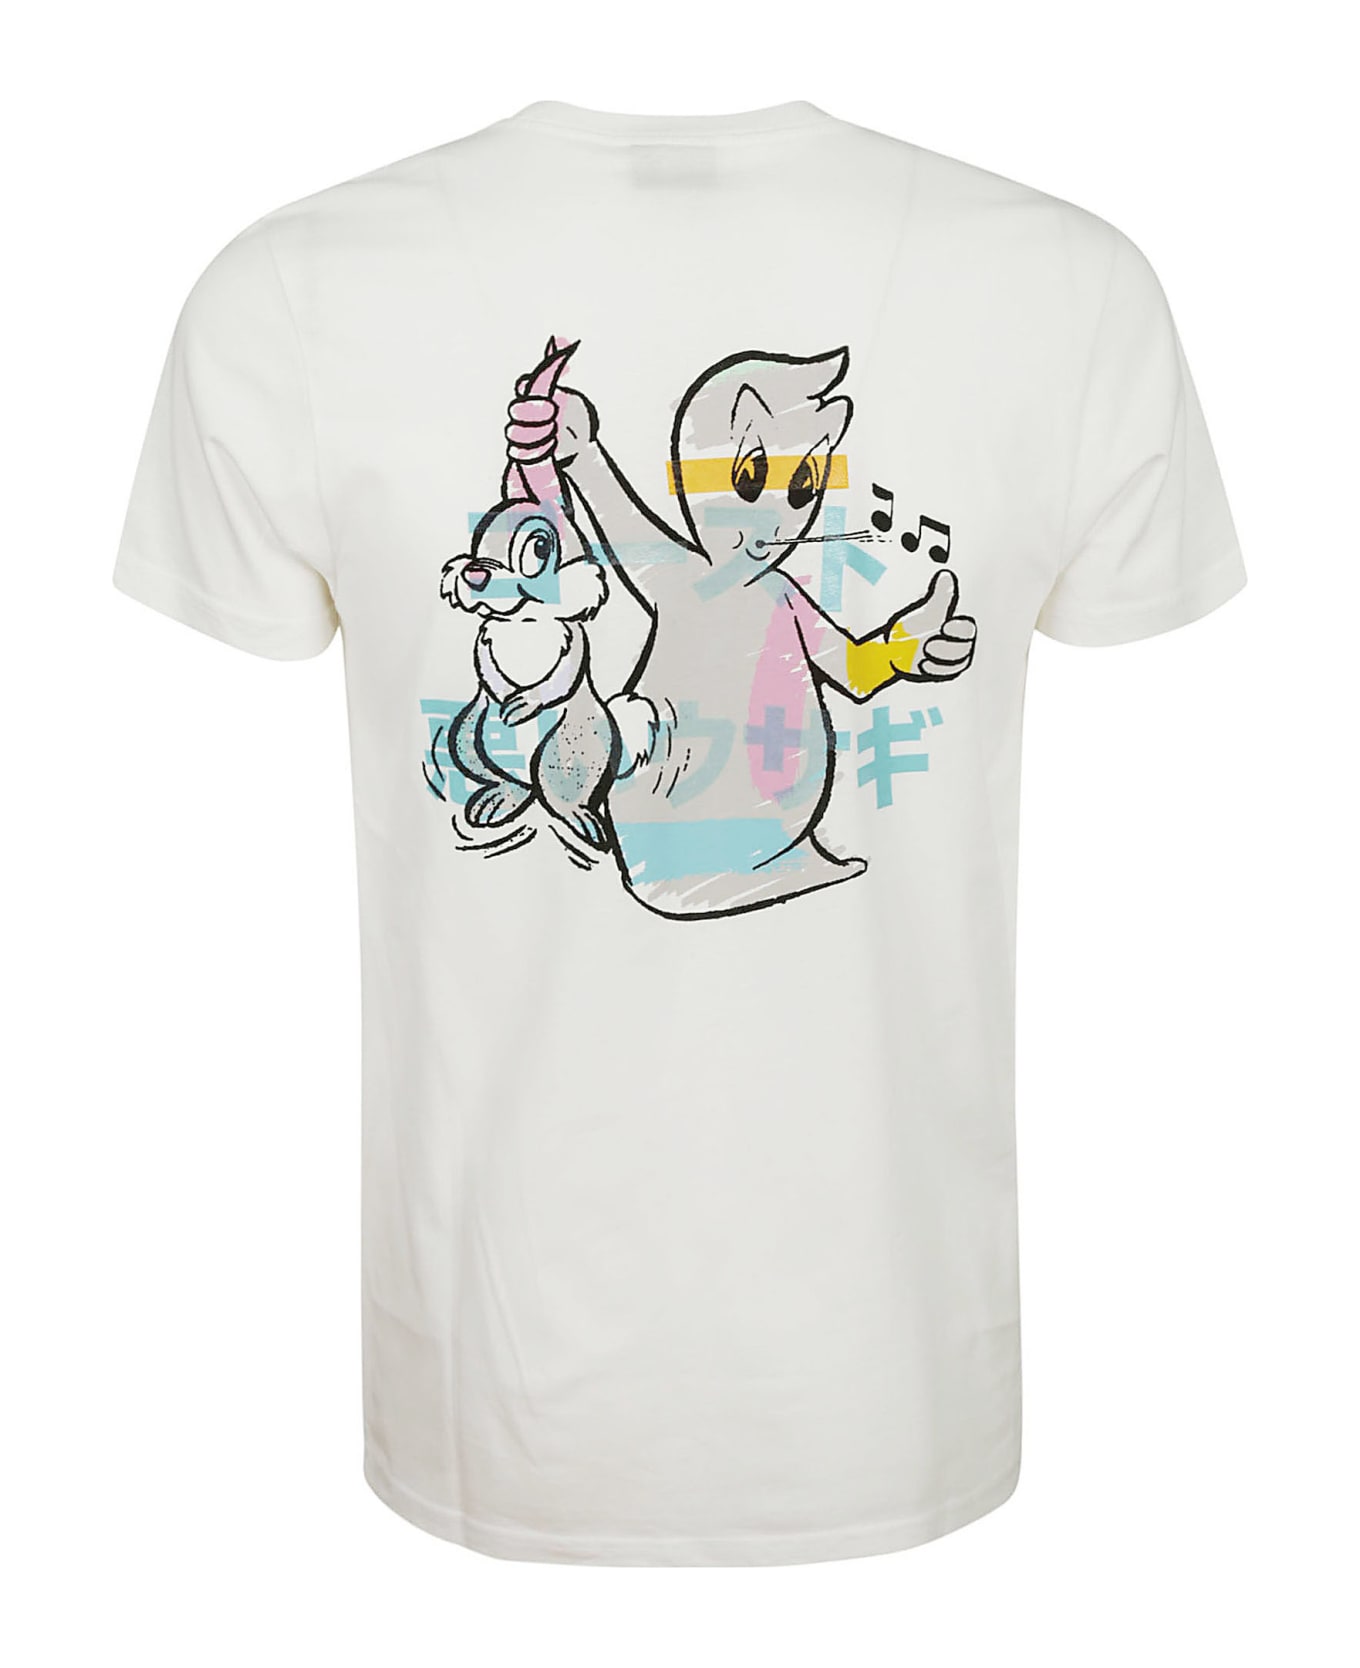 Paul Smith Slim Fit T-shirt Ghost - White